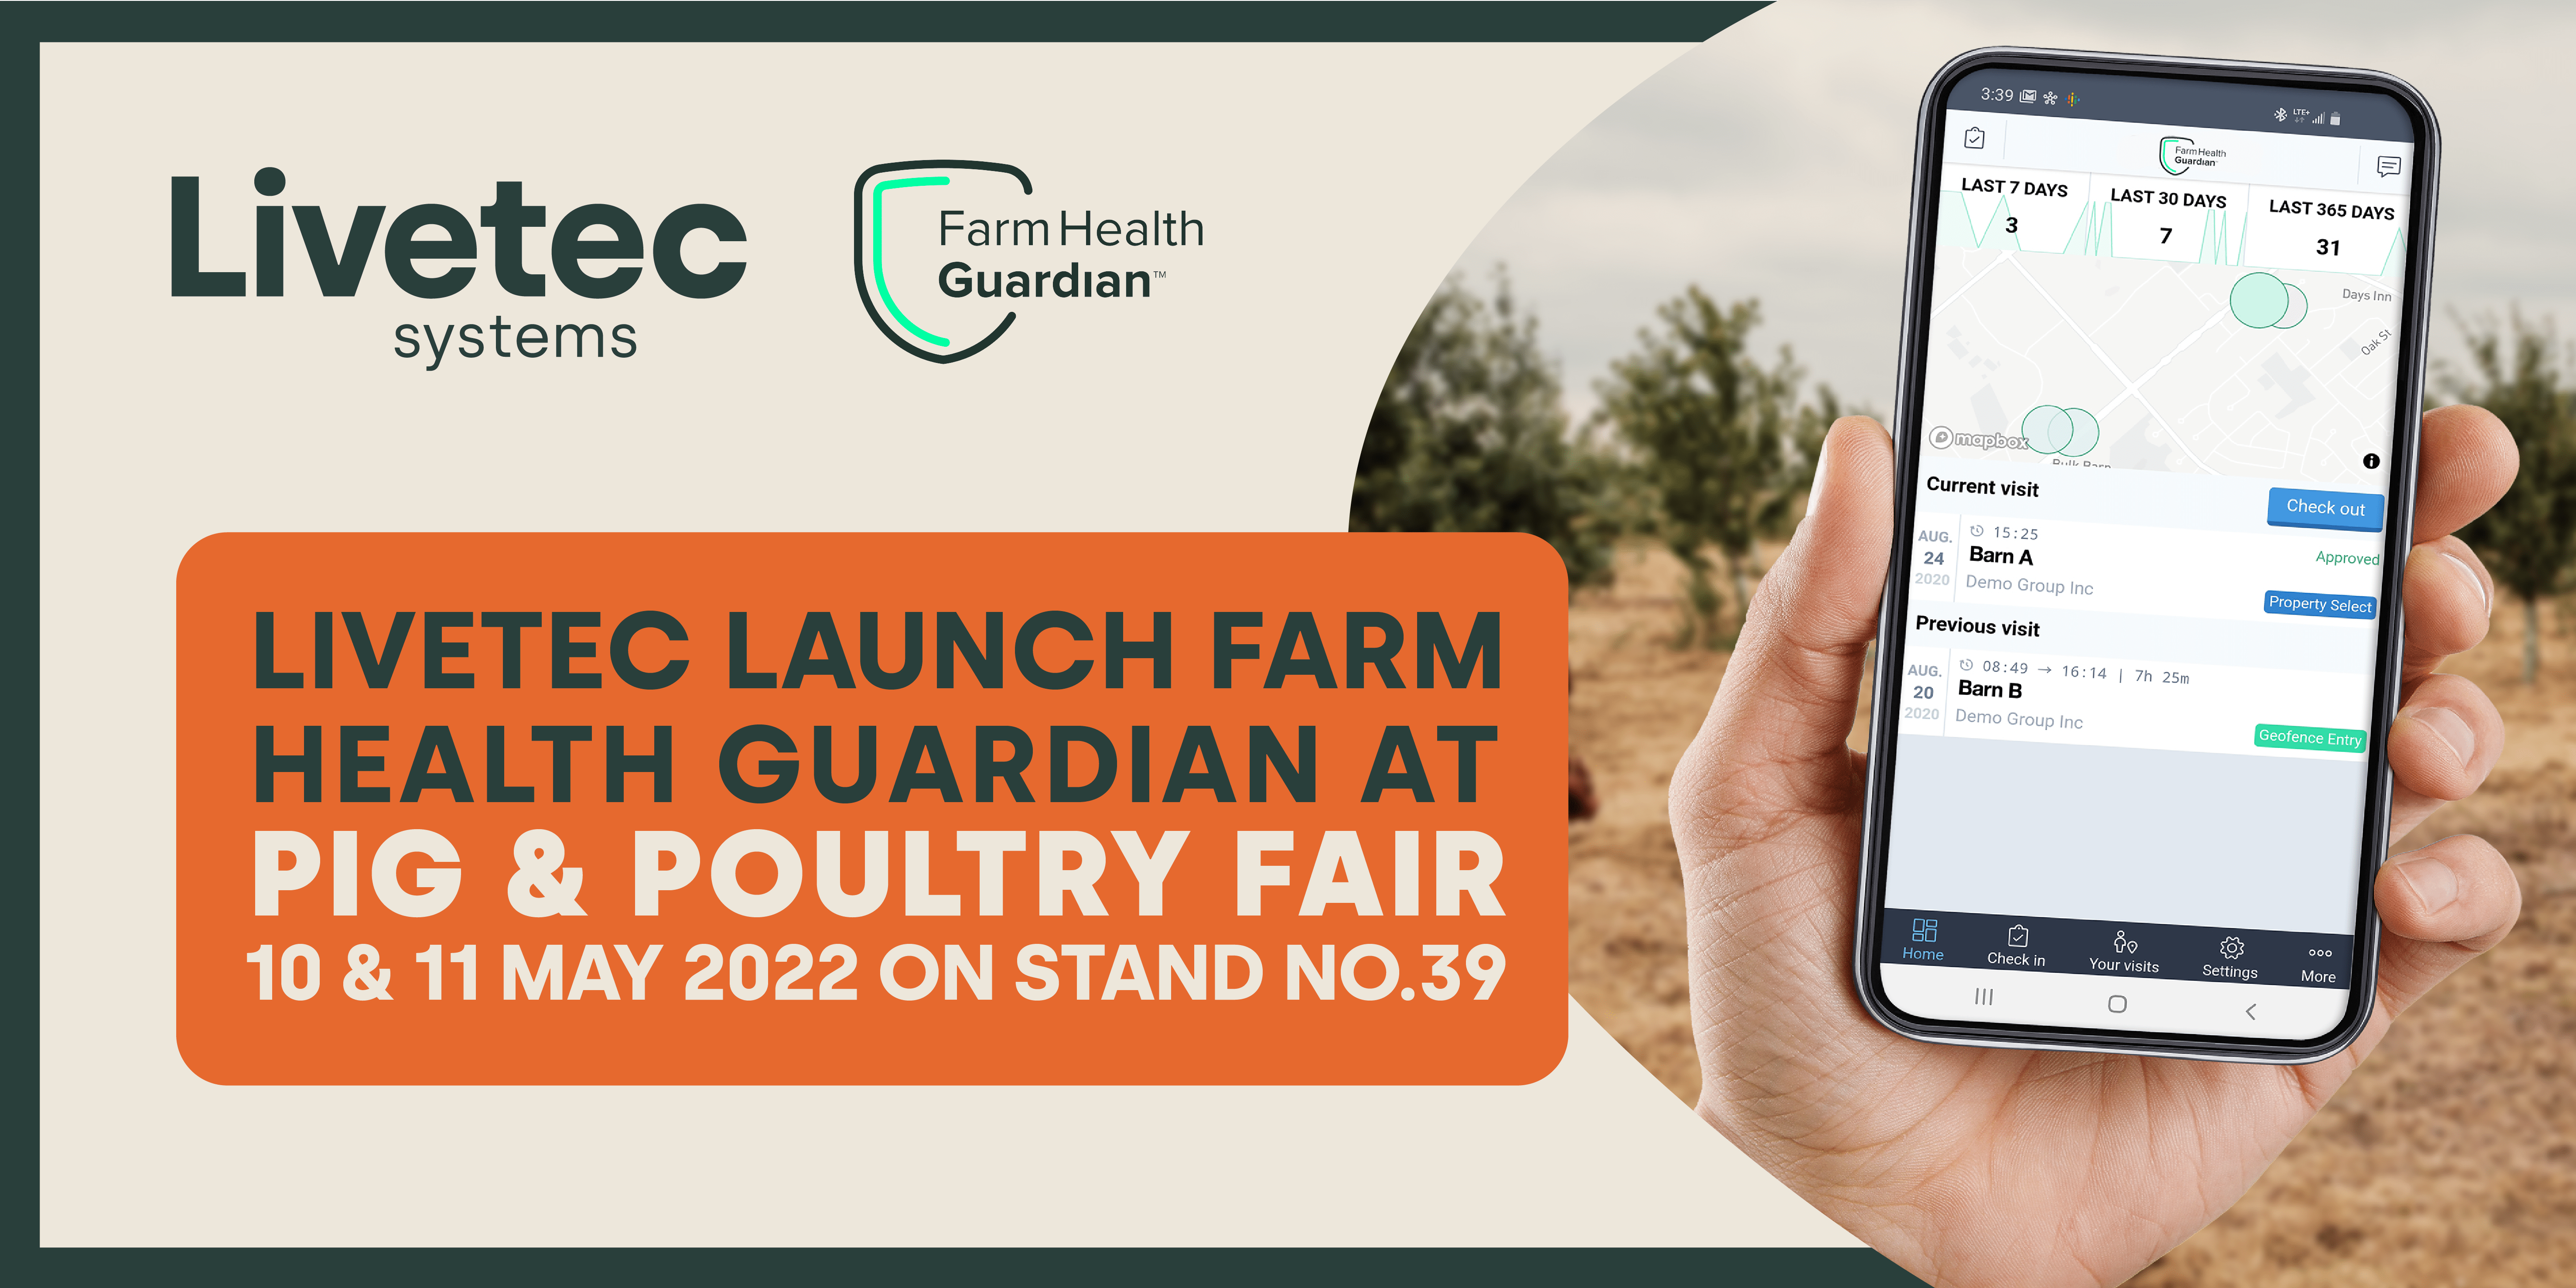 The launch of the Livetec Farm Health Guardian at the Pig & Poultry Fair 2022